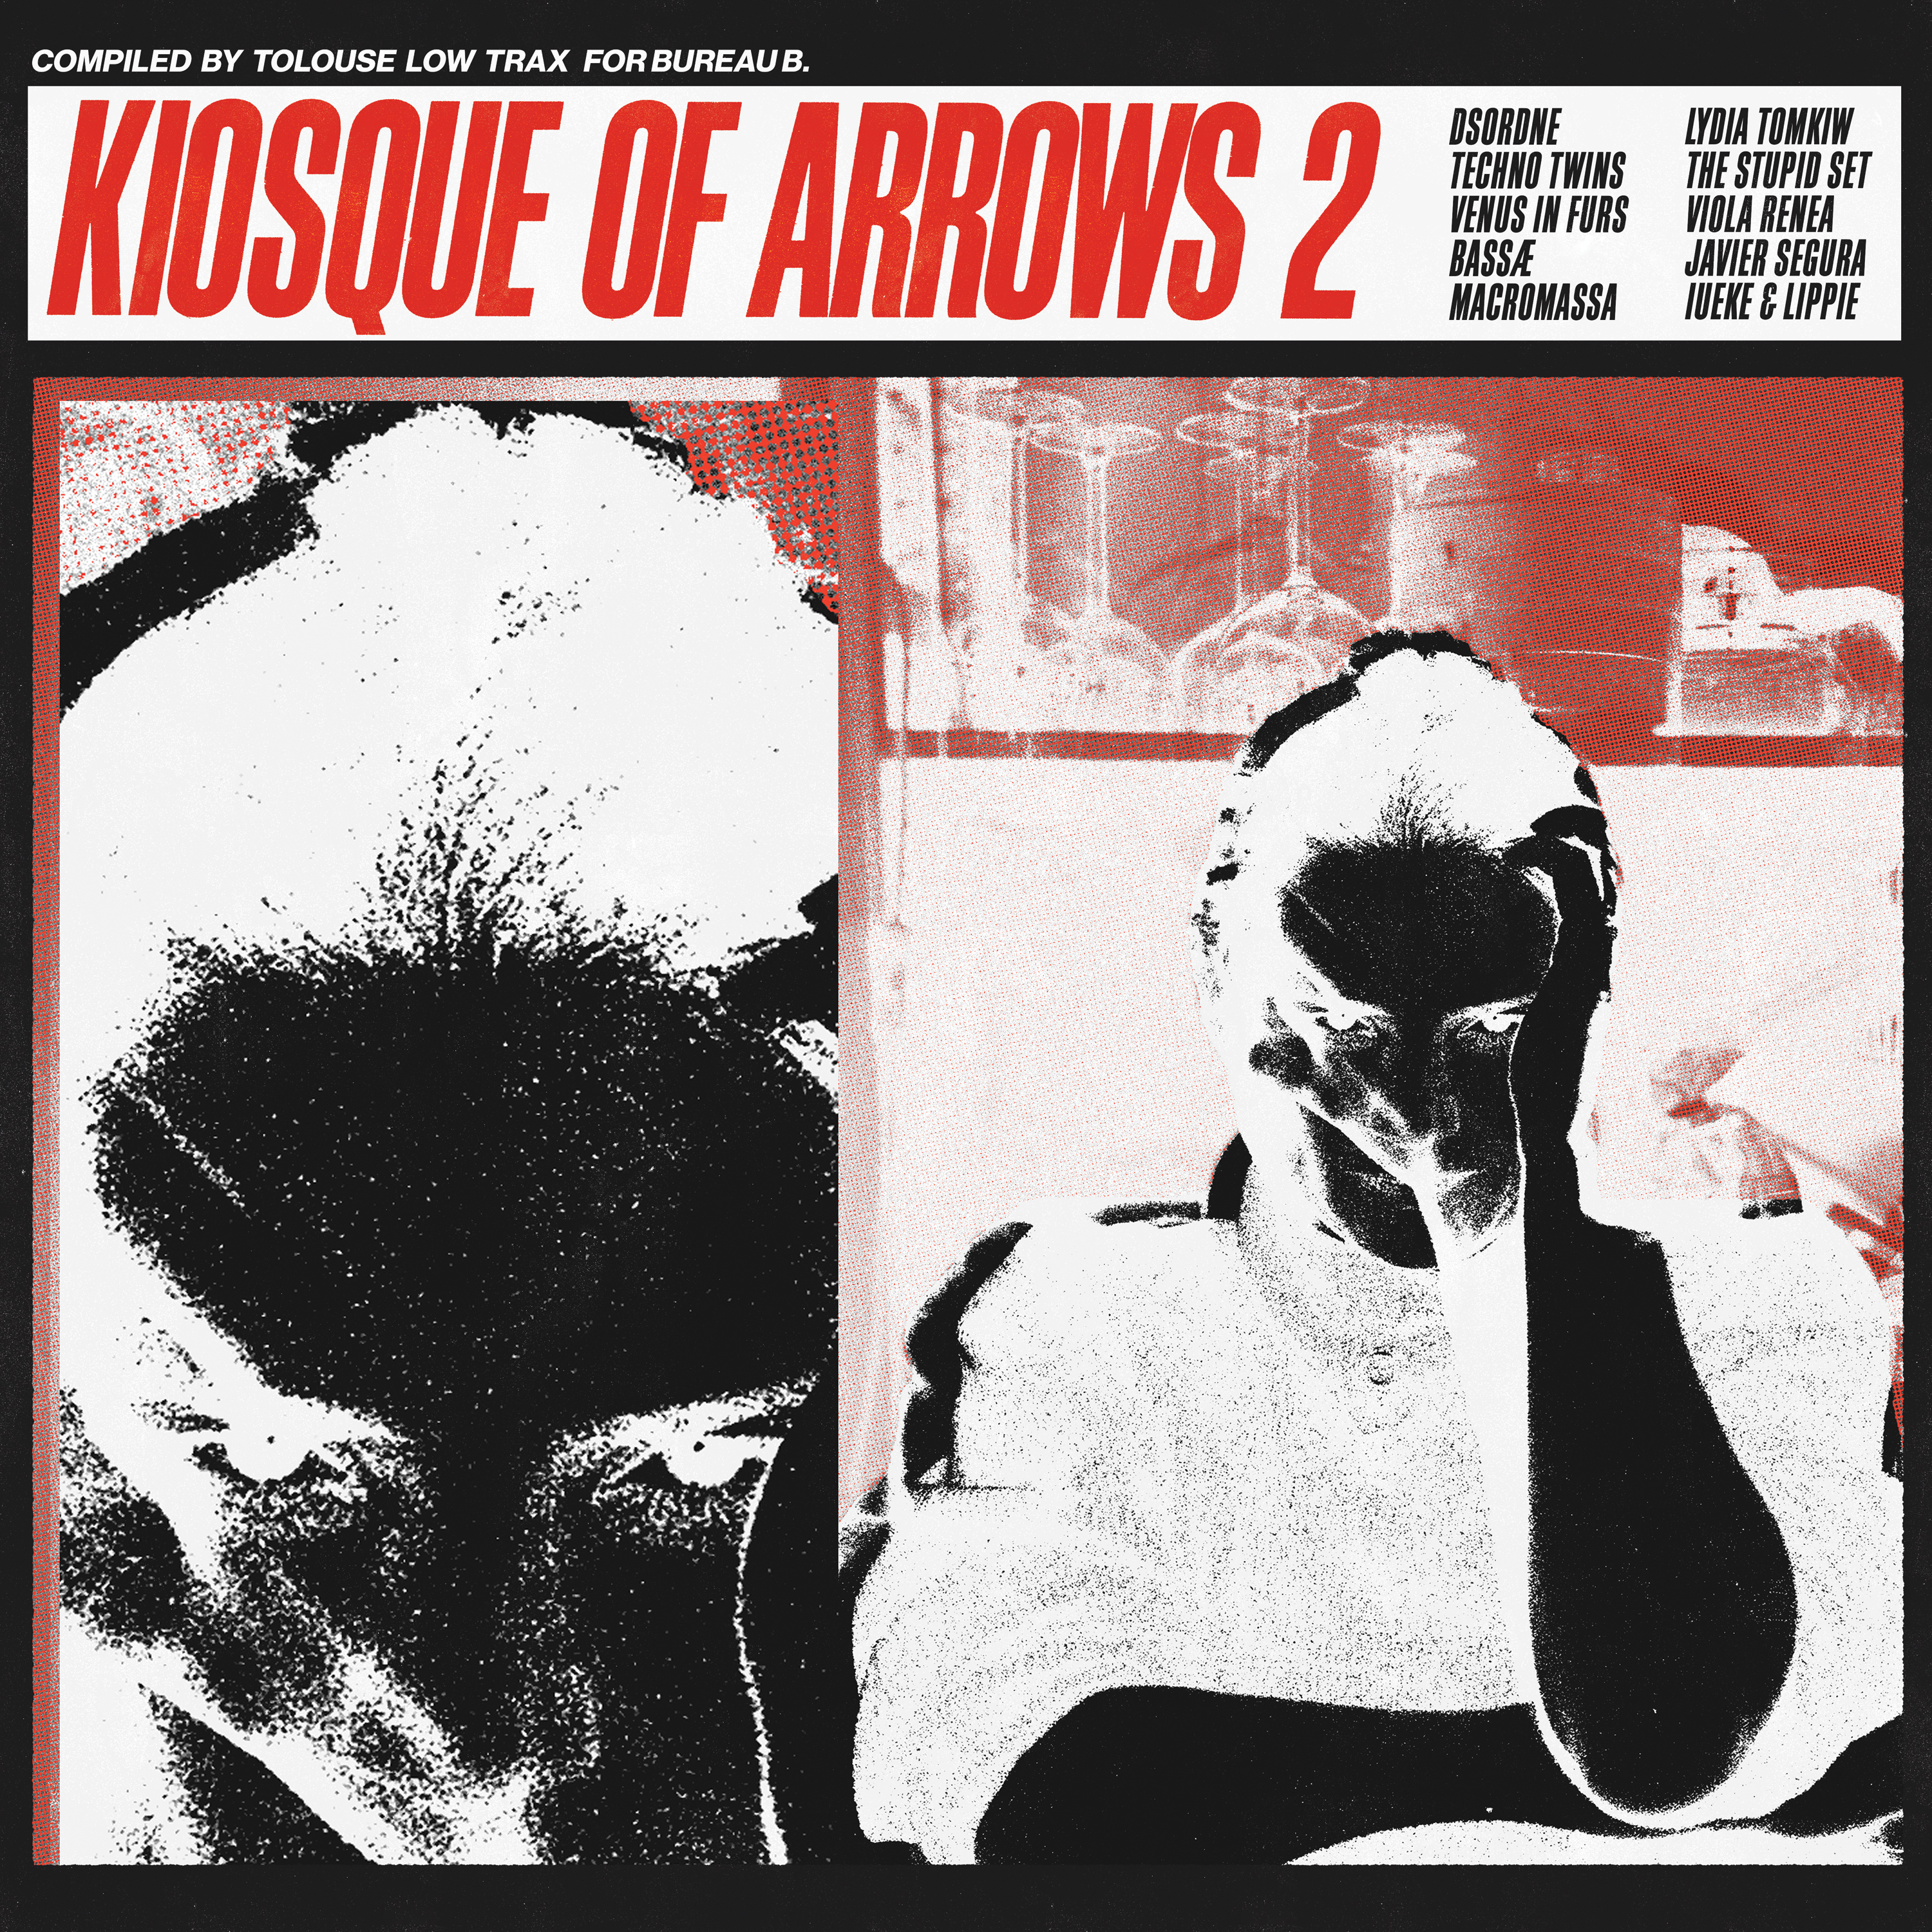 V.A. - Kiosque Of Arrows 2 (compiled by Tolouse Low Trax)